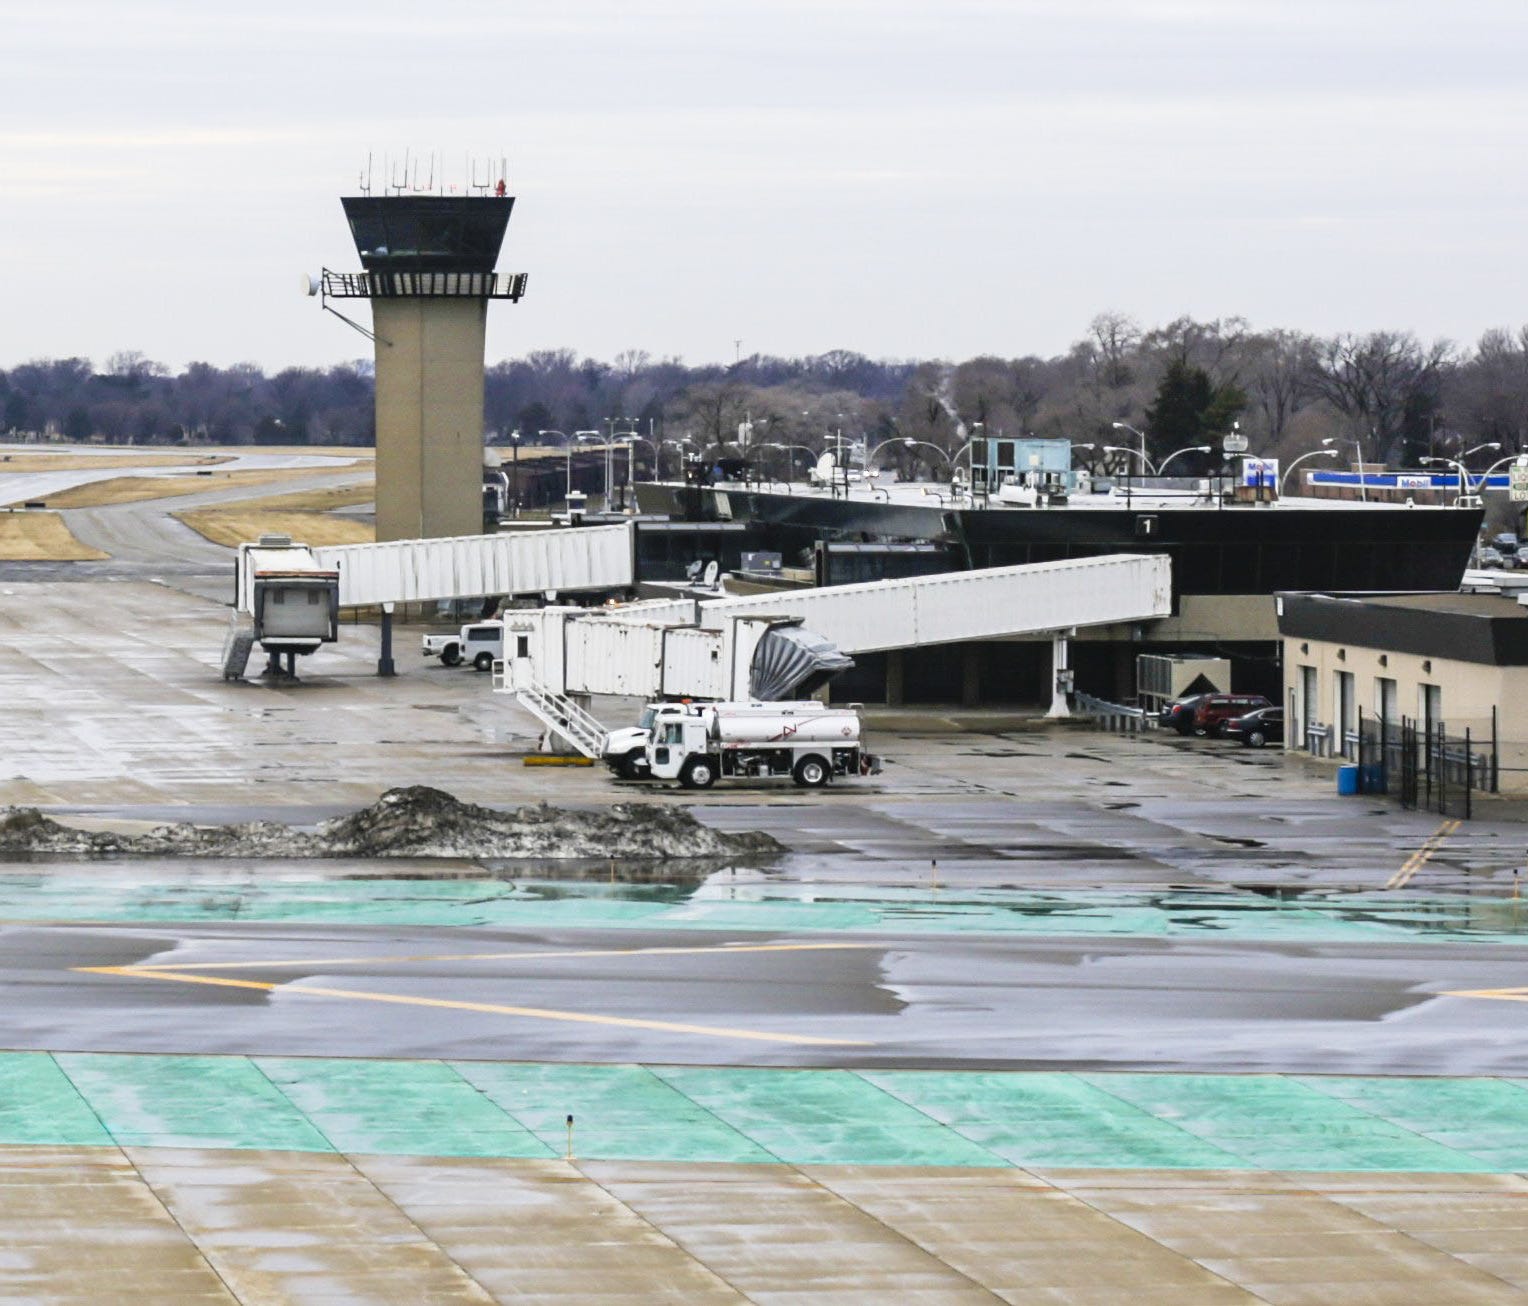 The Coleman A Young Municipal airport in April 2014 in Detroit.